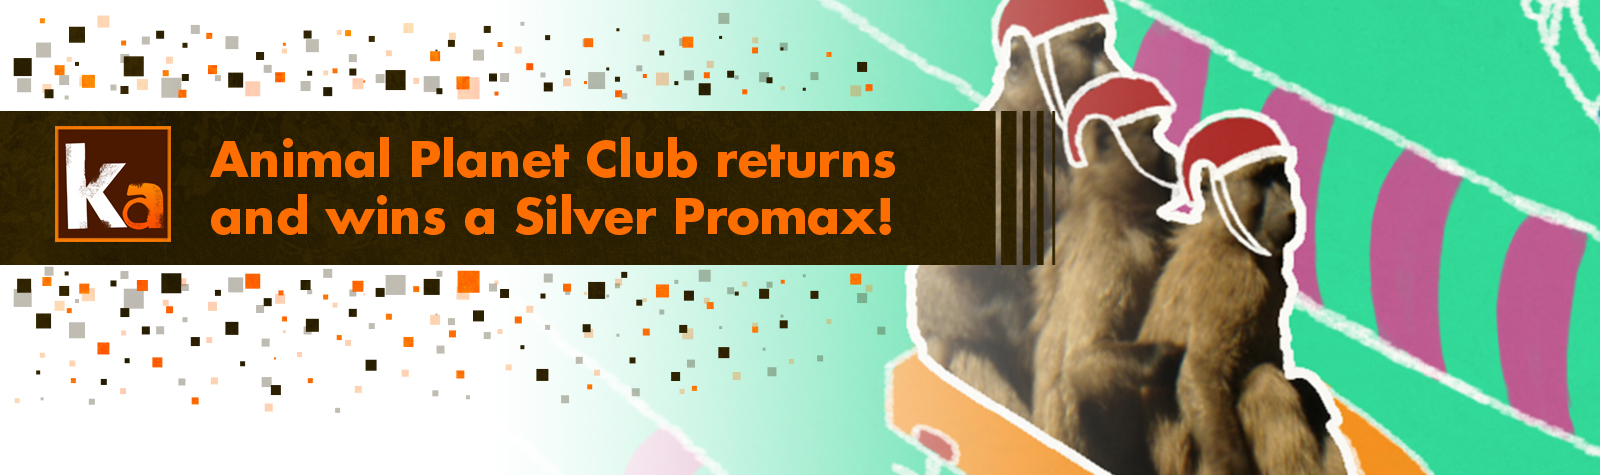 Animal Planet Club returns and wins a Silver Promax!